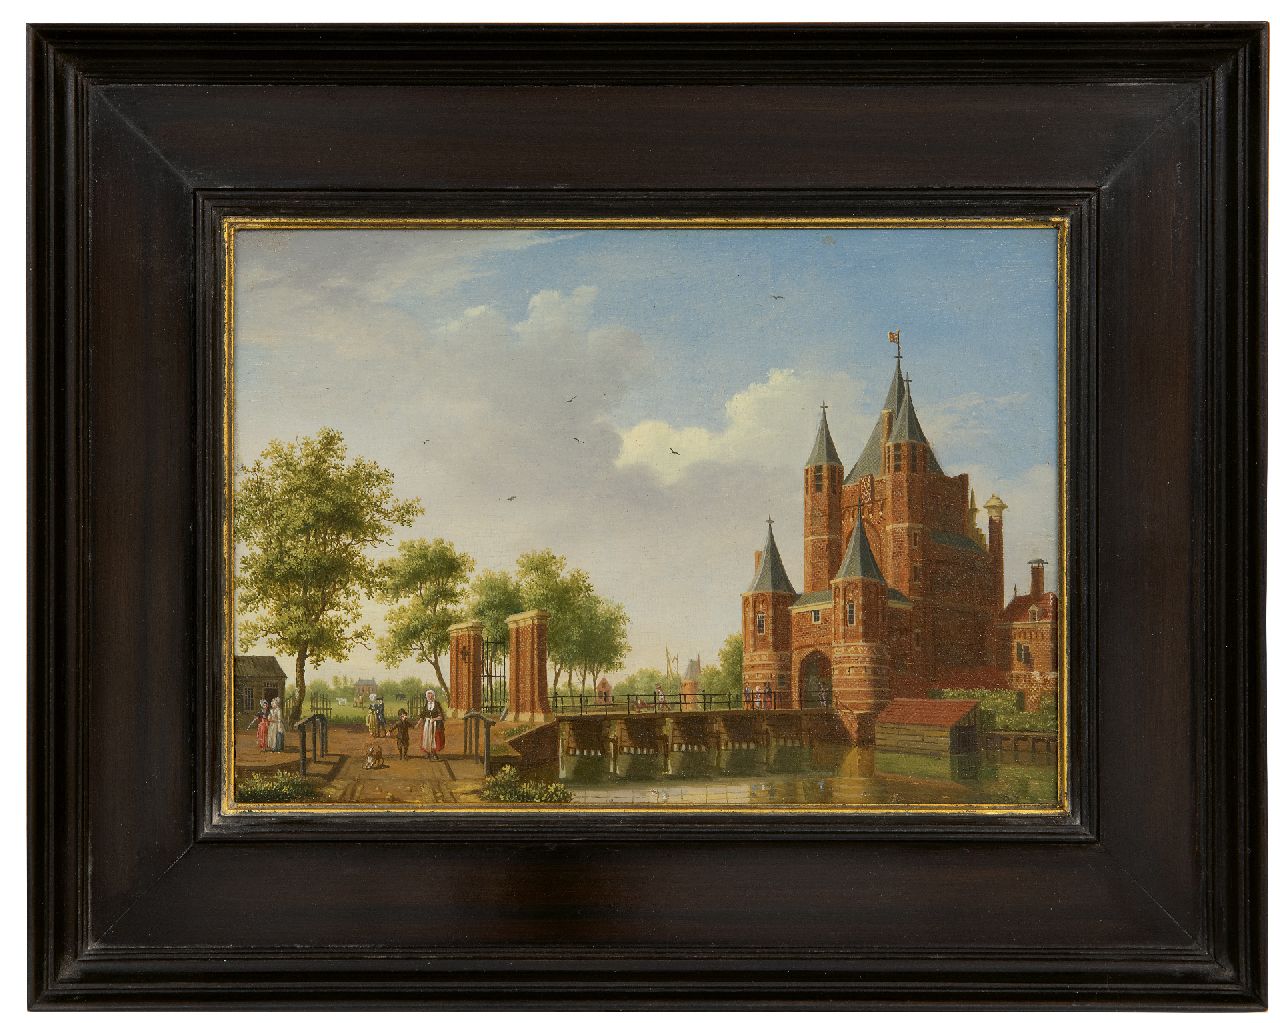 Ouwater I.  | Isaac Ouwater | Paintings offered for sale | View of the city gate Amsterdamse Poort in Haarlem, oil on panel 13.8 x 19.6 cm, (prijs is per pendant, verkoop alleen tezamen)